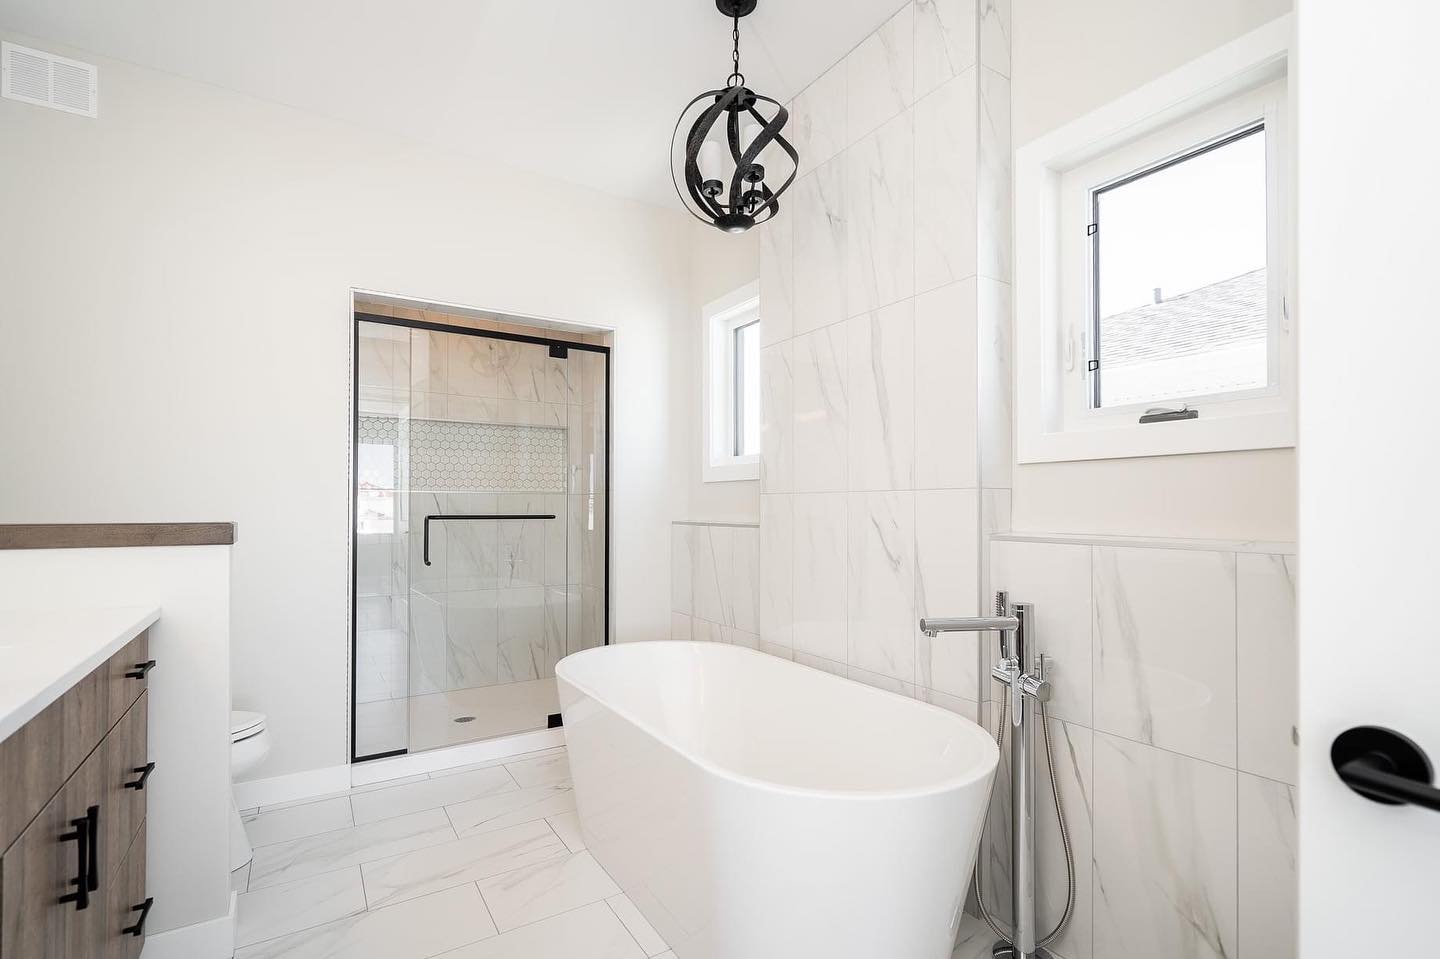 Nothing makes us smile more than natural light, especially on a beautiful day like today! This bright bathroom is filled with all the natural light making it the perfect space to get ready every morning.